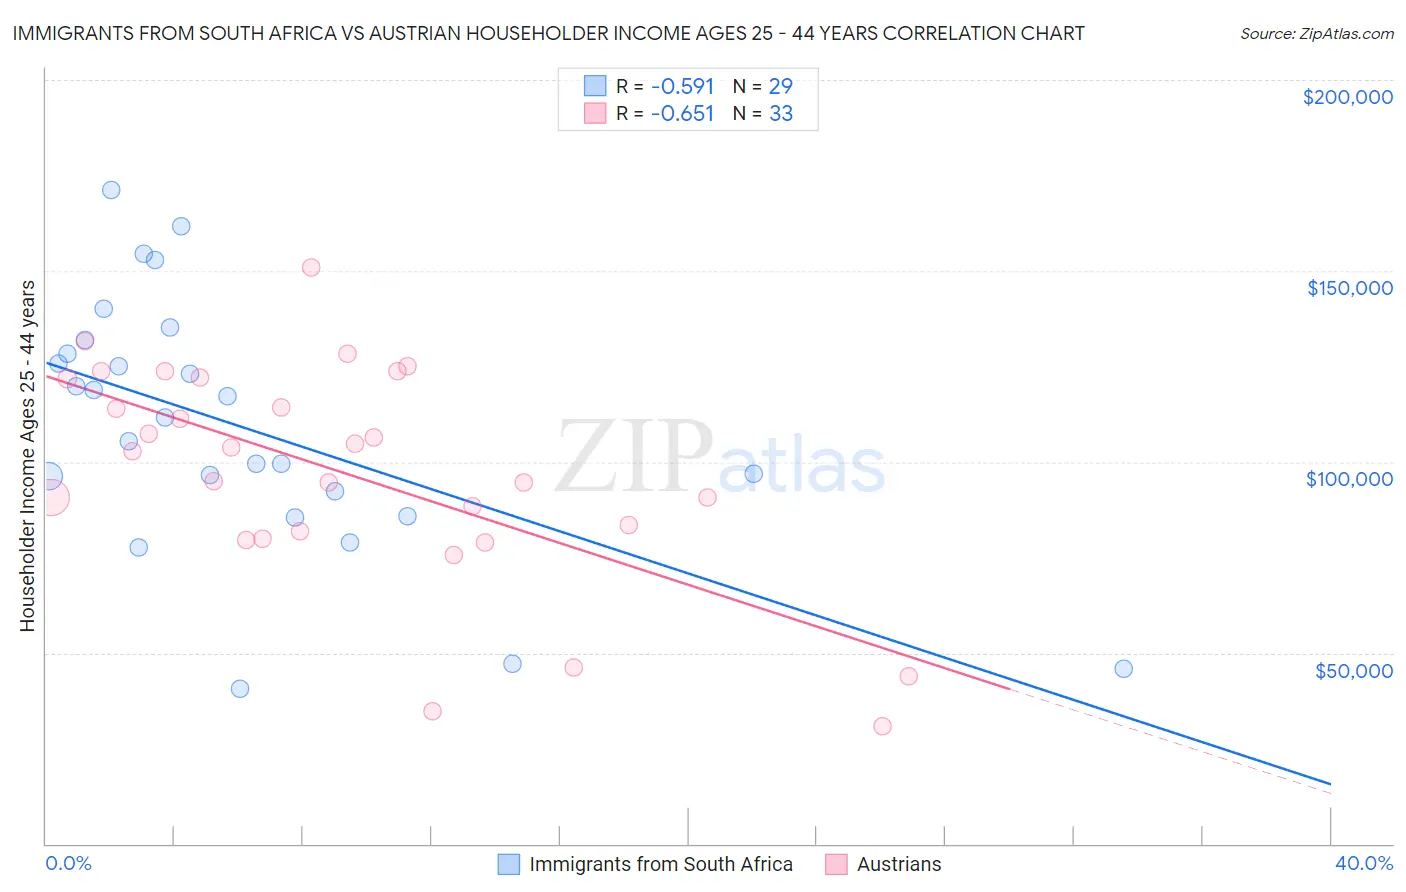 Immigrants from South Africa vs Austrian Householder Income Ages 25 - 44 years